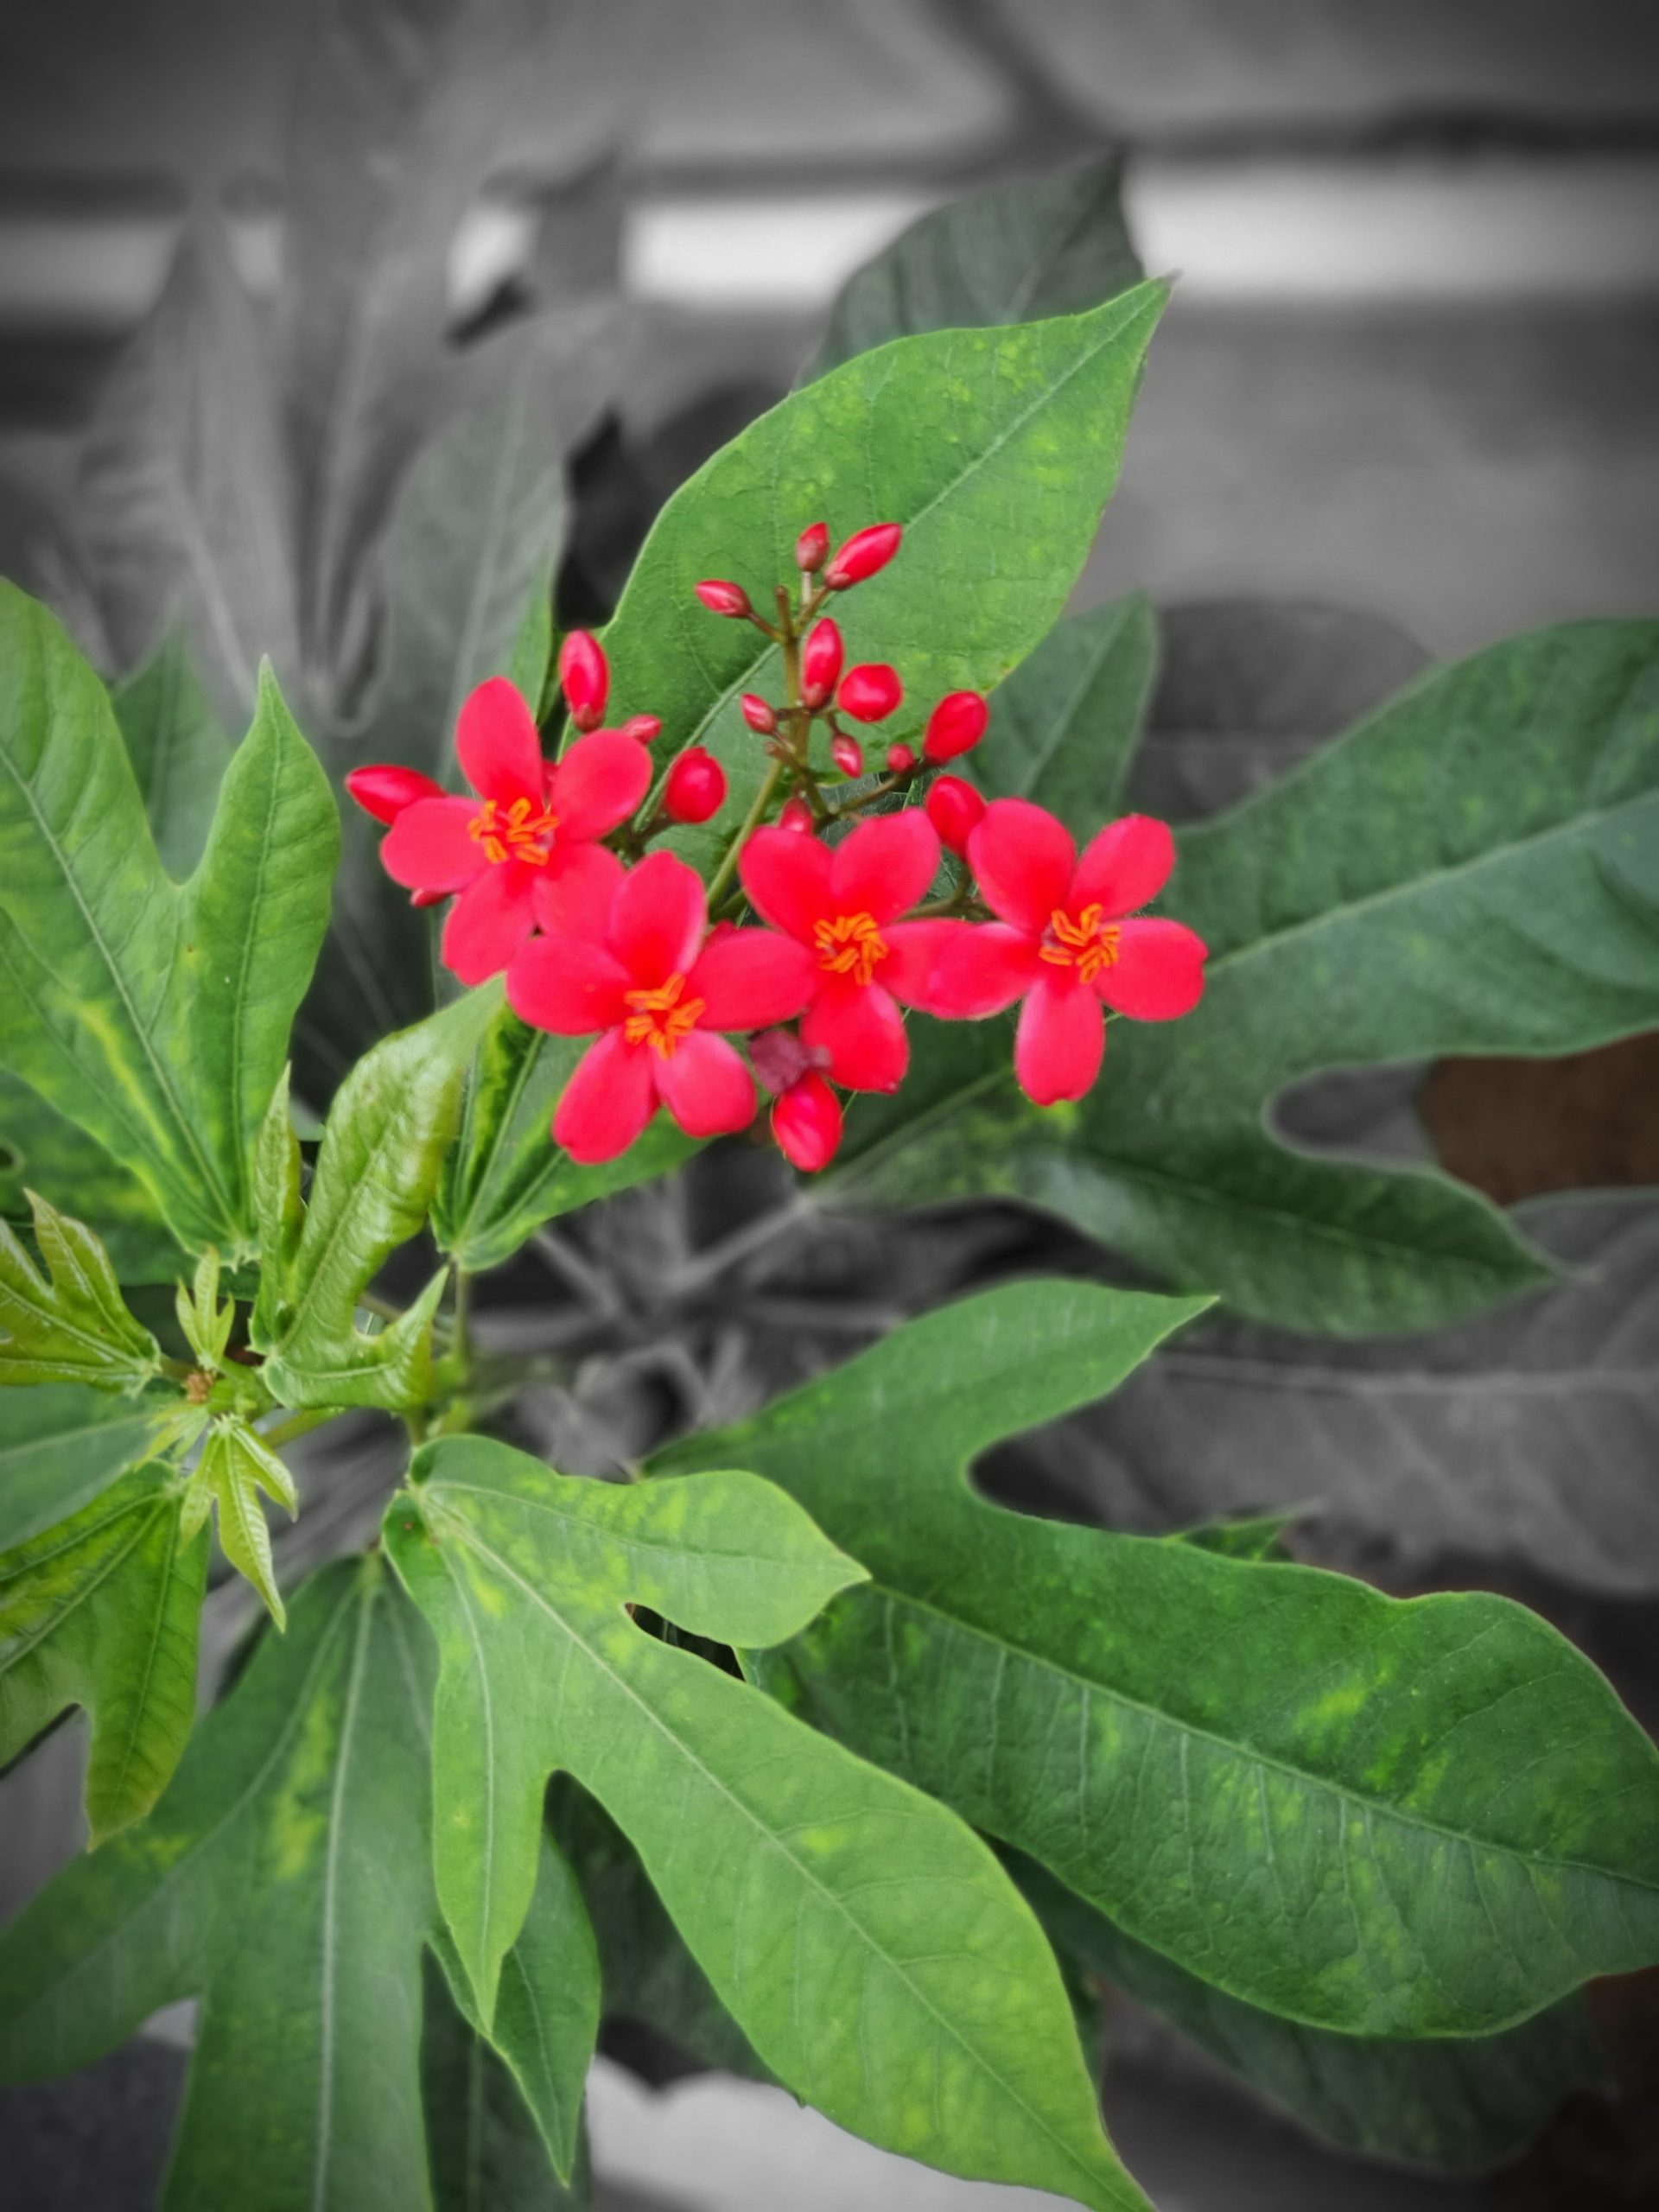 Red flower on a plant